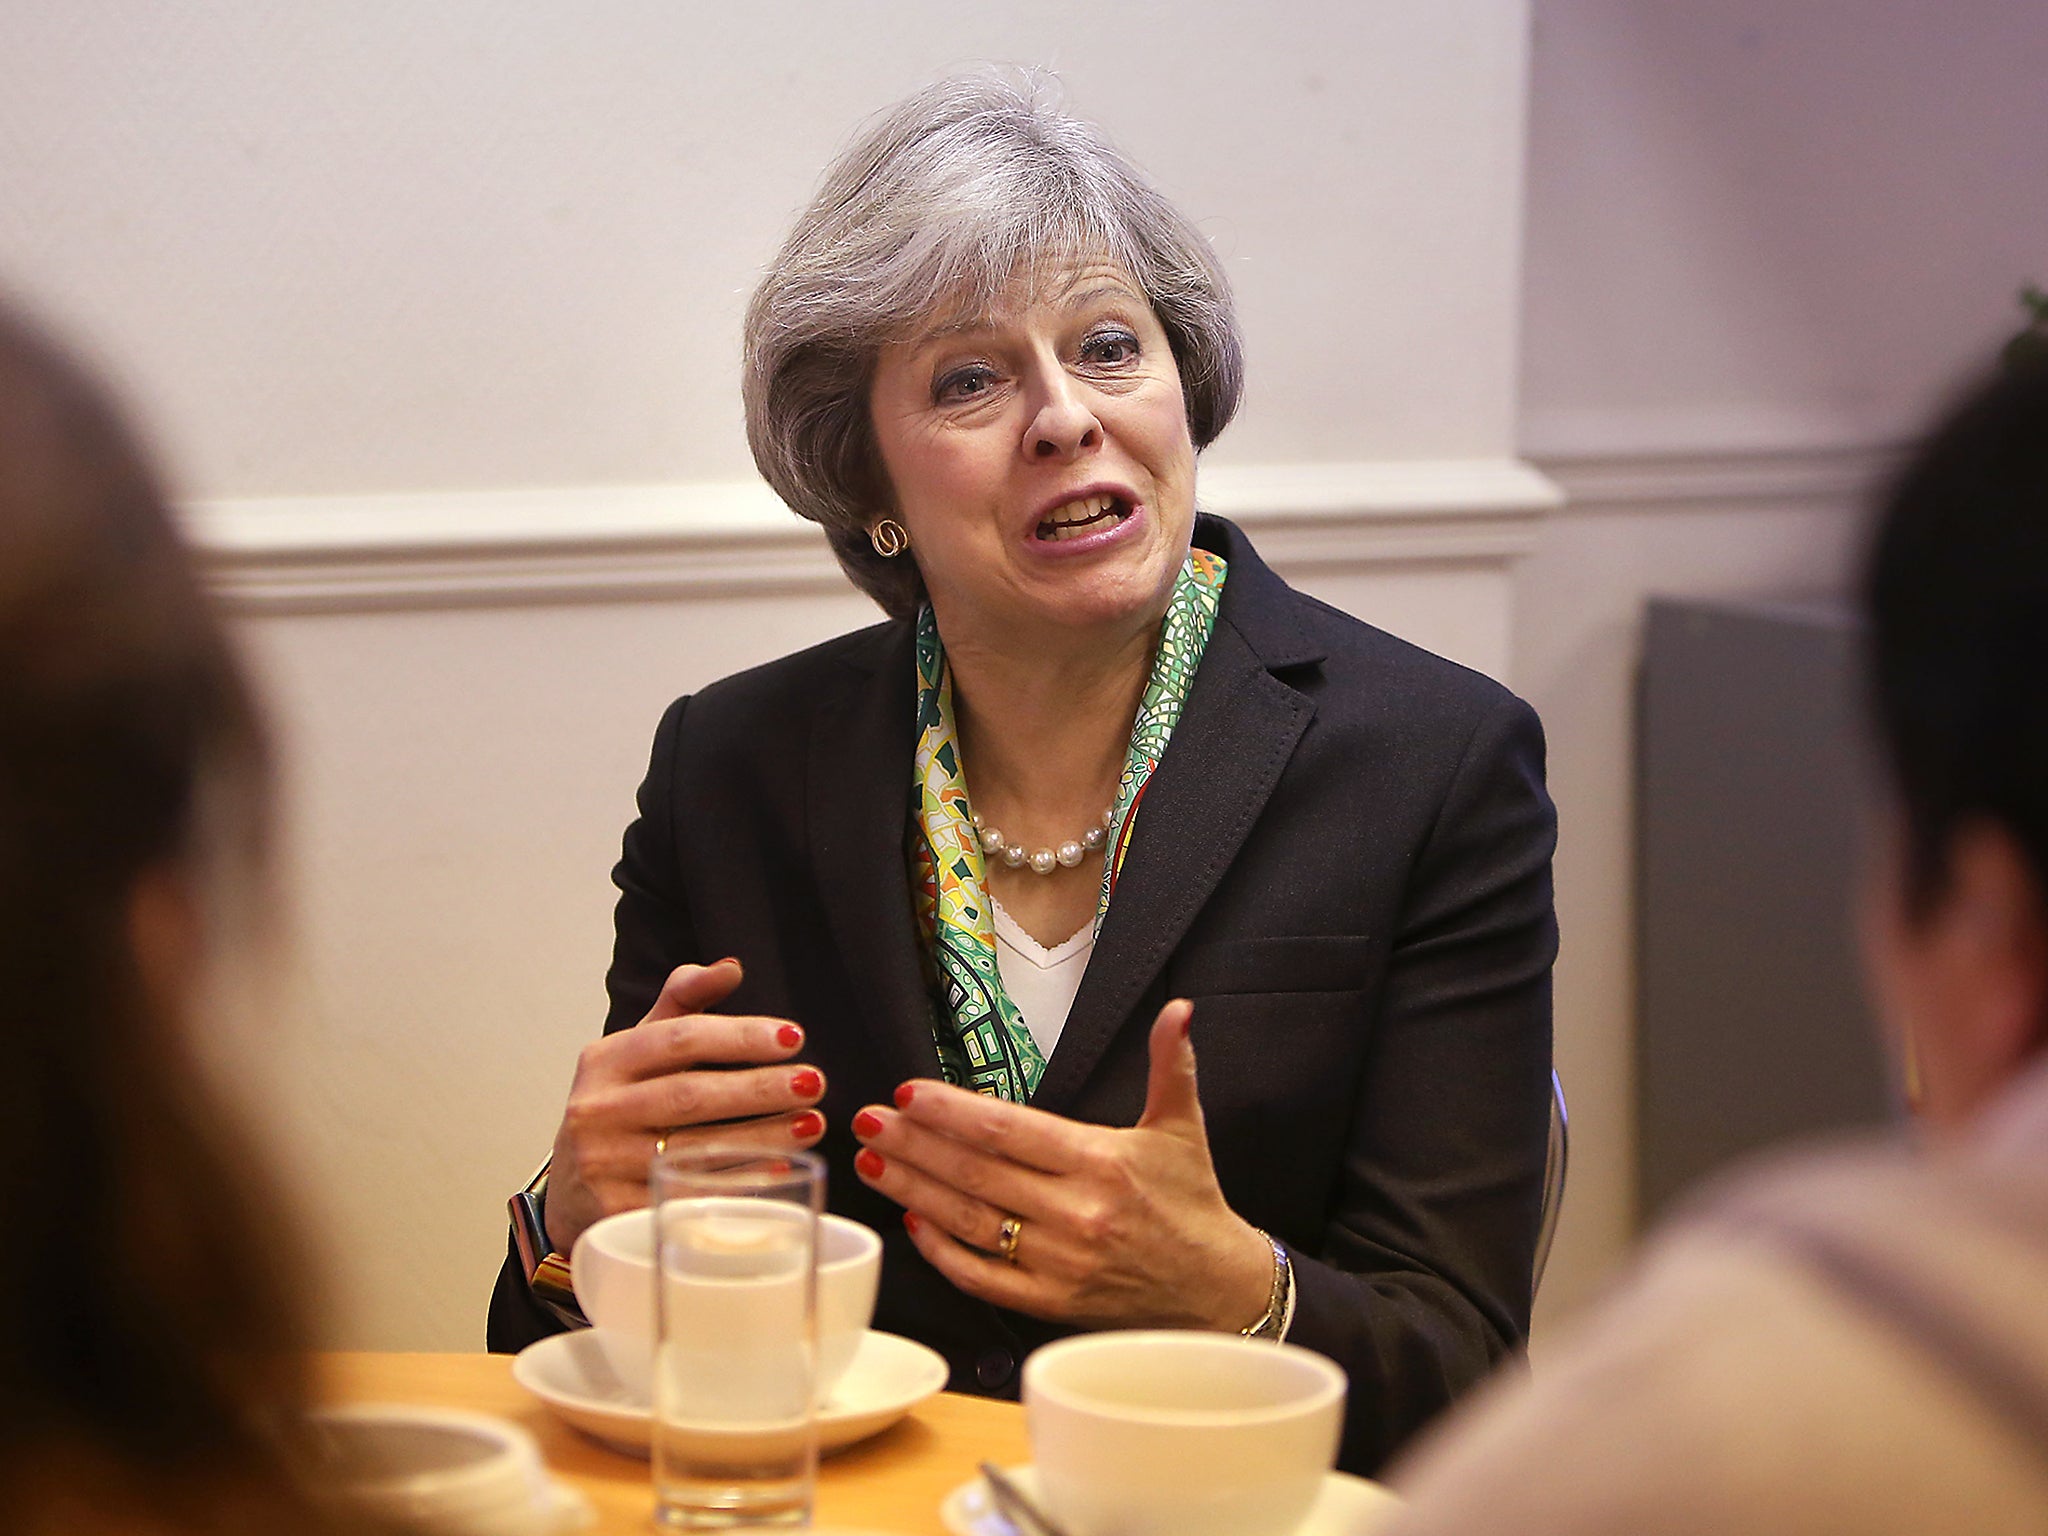 Theresa May has spoken out about mental health, but her government is hitting those most affected by it